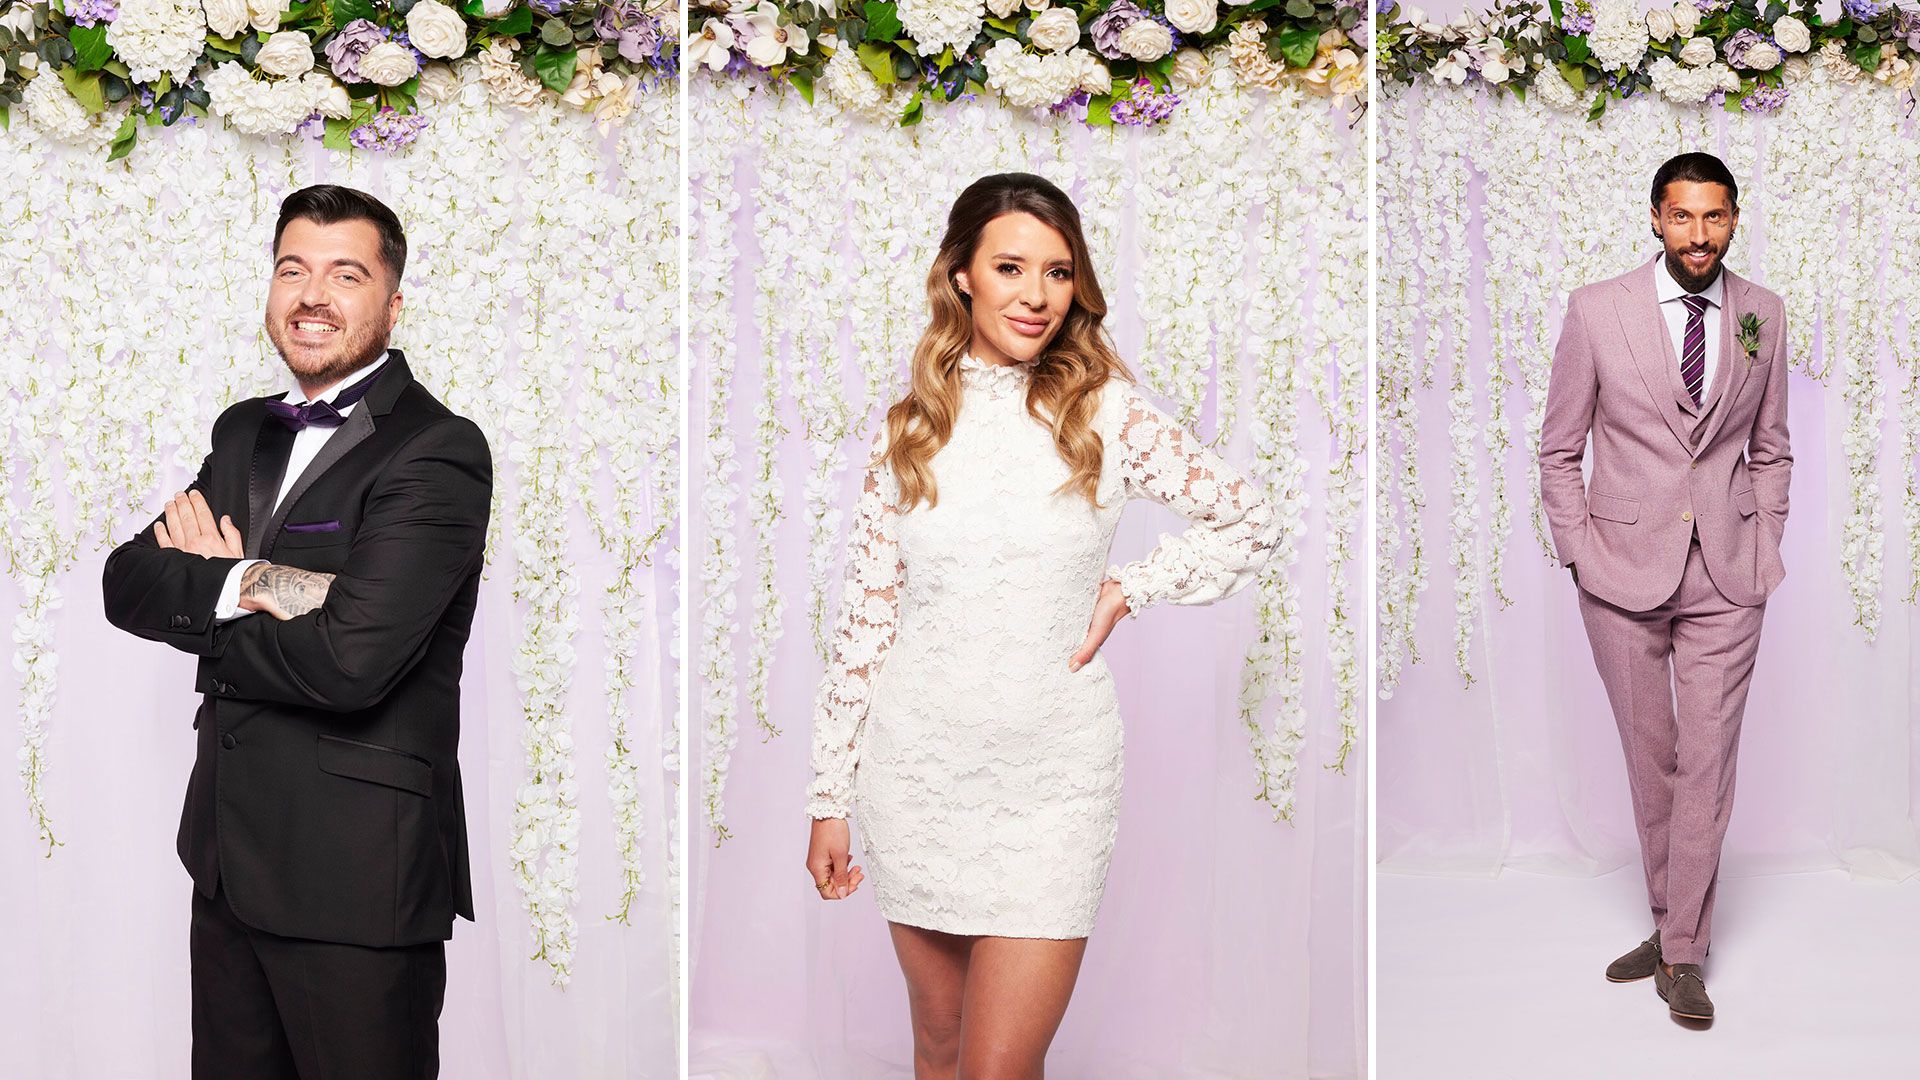 Married at First Sight UK stars Luke, Laura and Brad